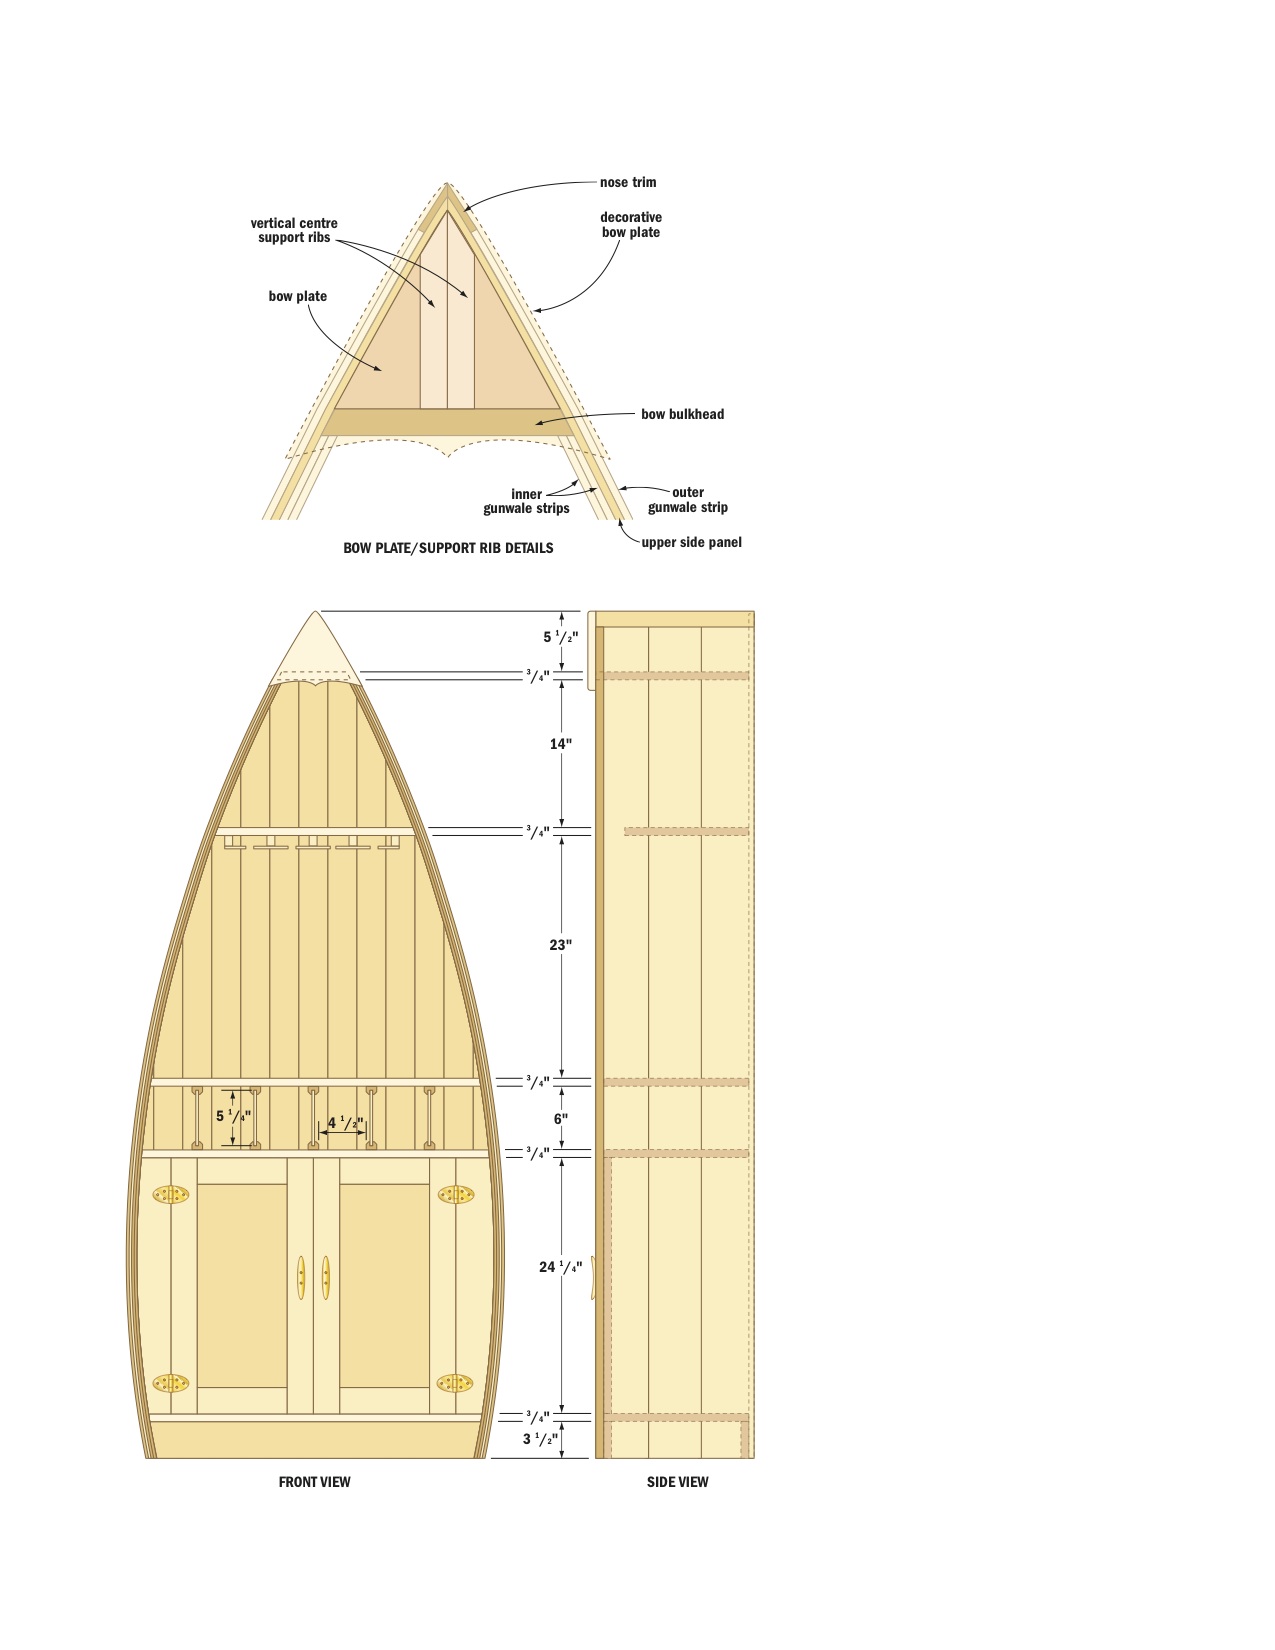 Cozy Boat bookshelf plans Inspired by the photograph of the old canoe bookcase boat shaped bookcase plans